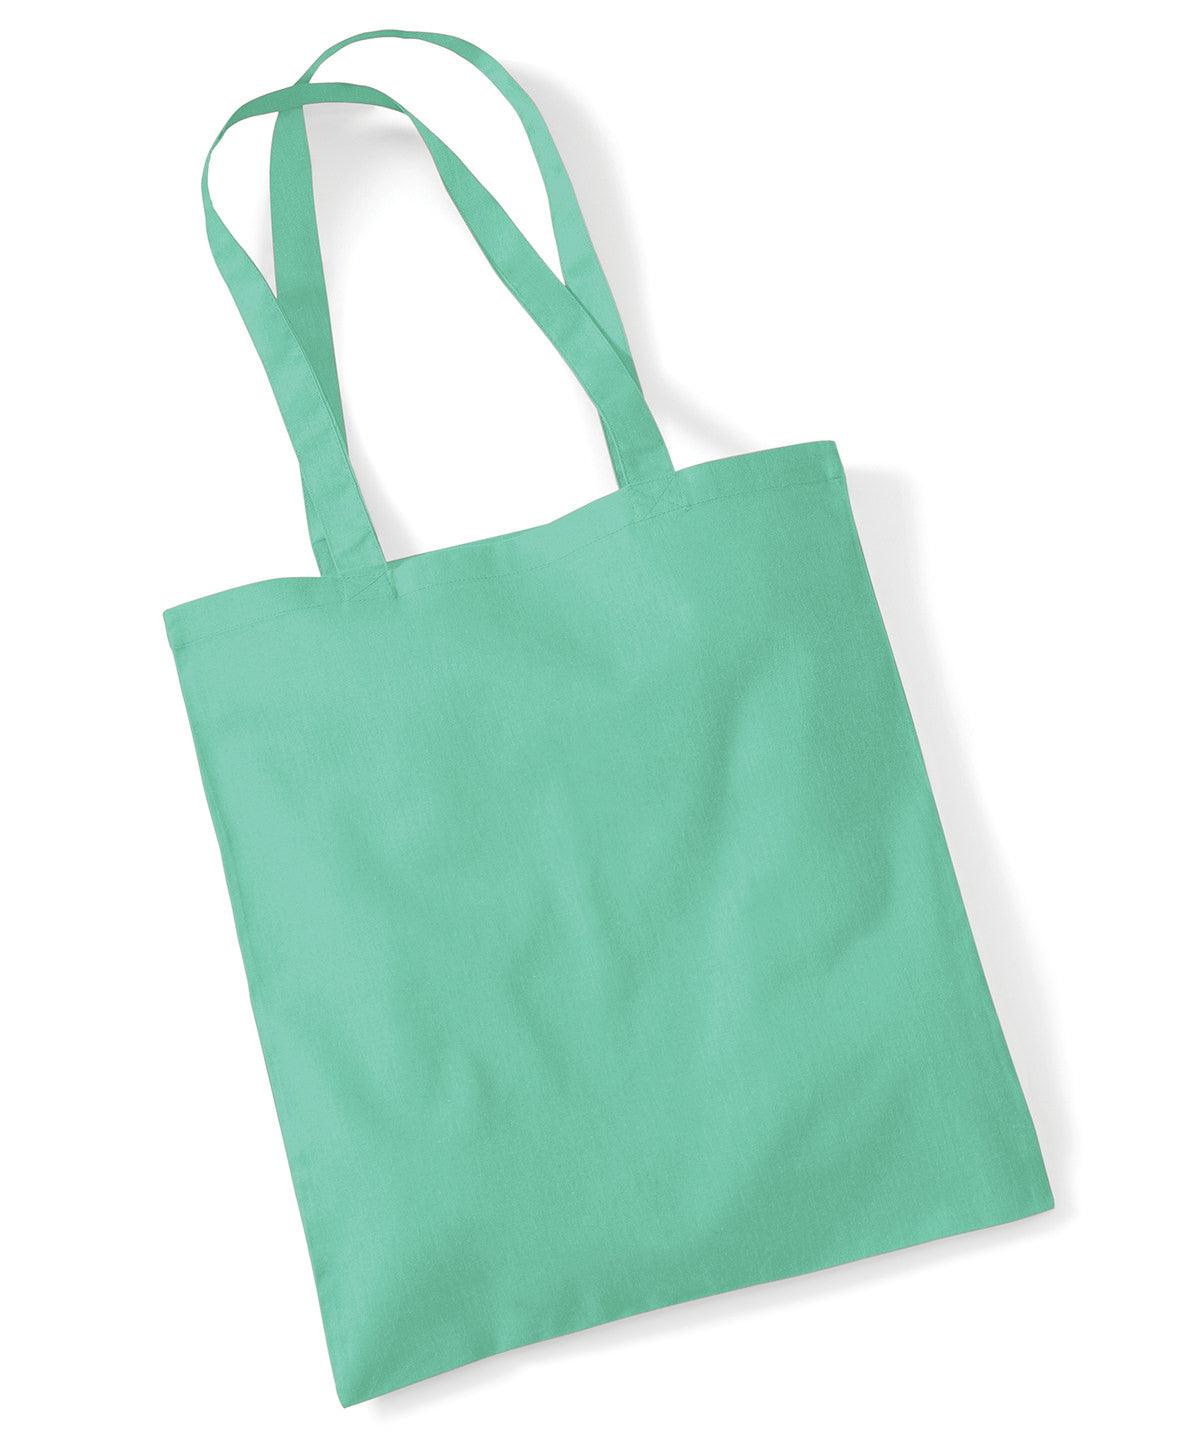 Mint - Bag for life - long handles Bags Westford Mill Bags & Luggage, Crafting, Must Haves, Rebrandable Schoolwear Centres